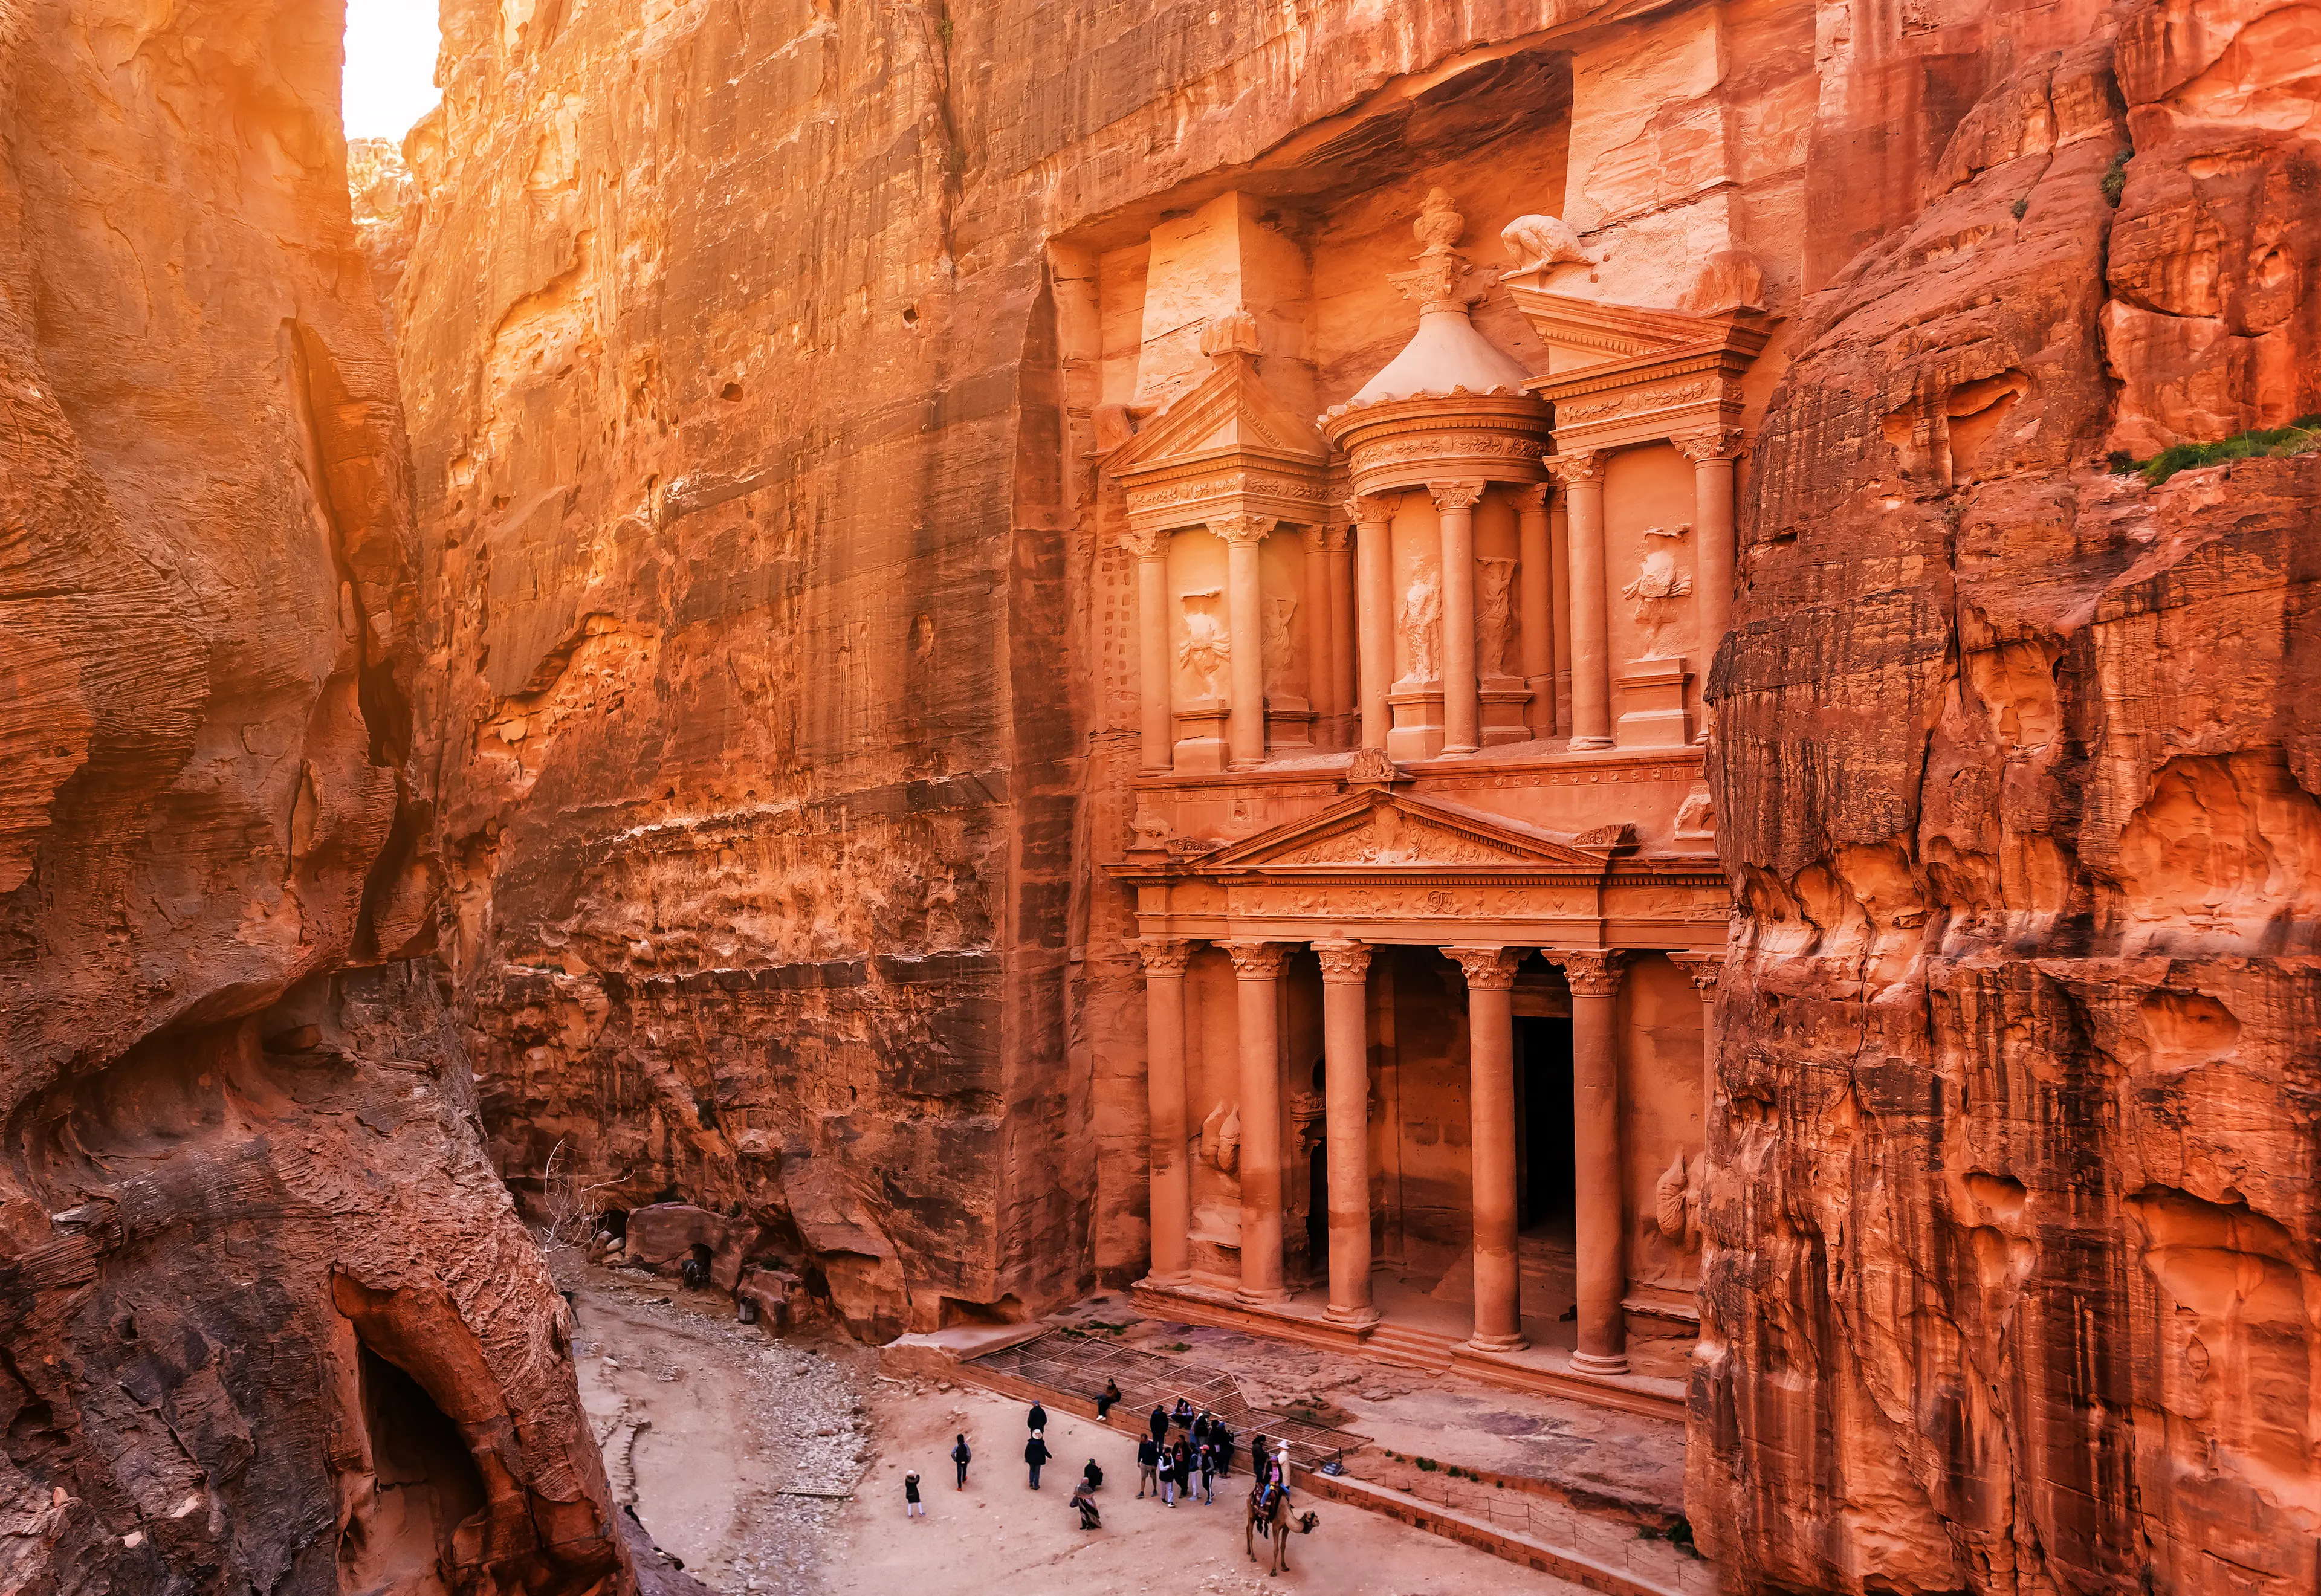 1-Day Petra, Jordan Food and Wine Adventure with Friends